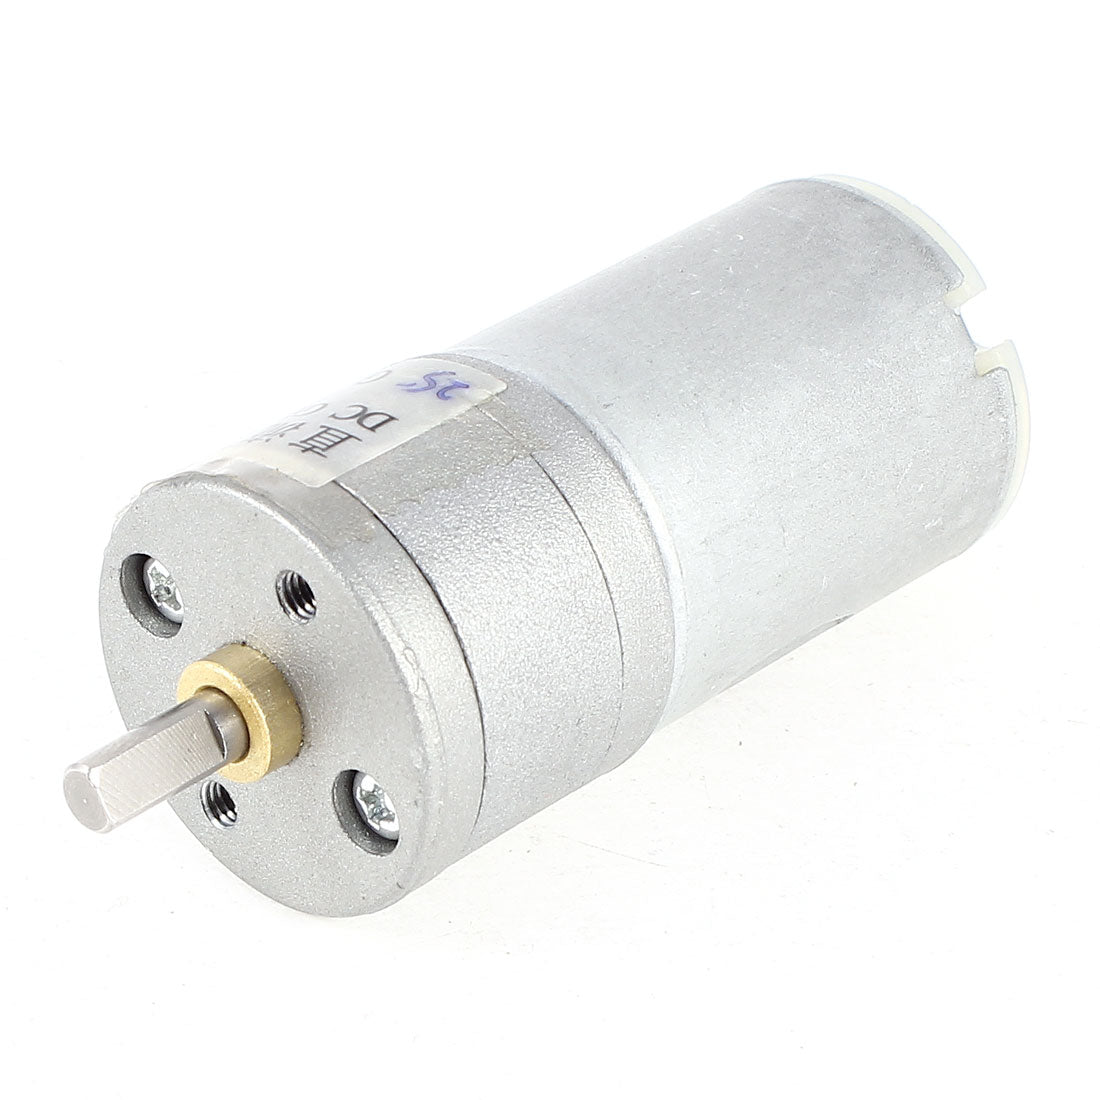 uxcell Uxcell DC 12V 1500RPM 4mm D Shape Shaft Cylinder Electric Geared Box Speed Reduce Motor